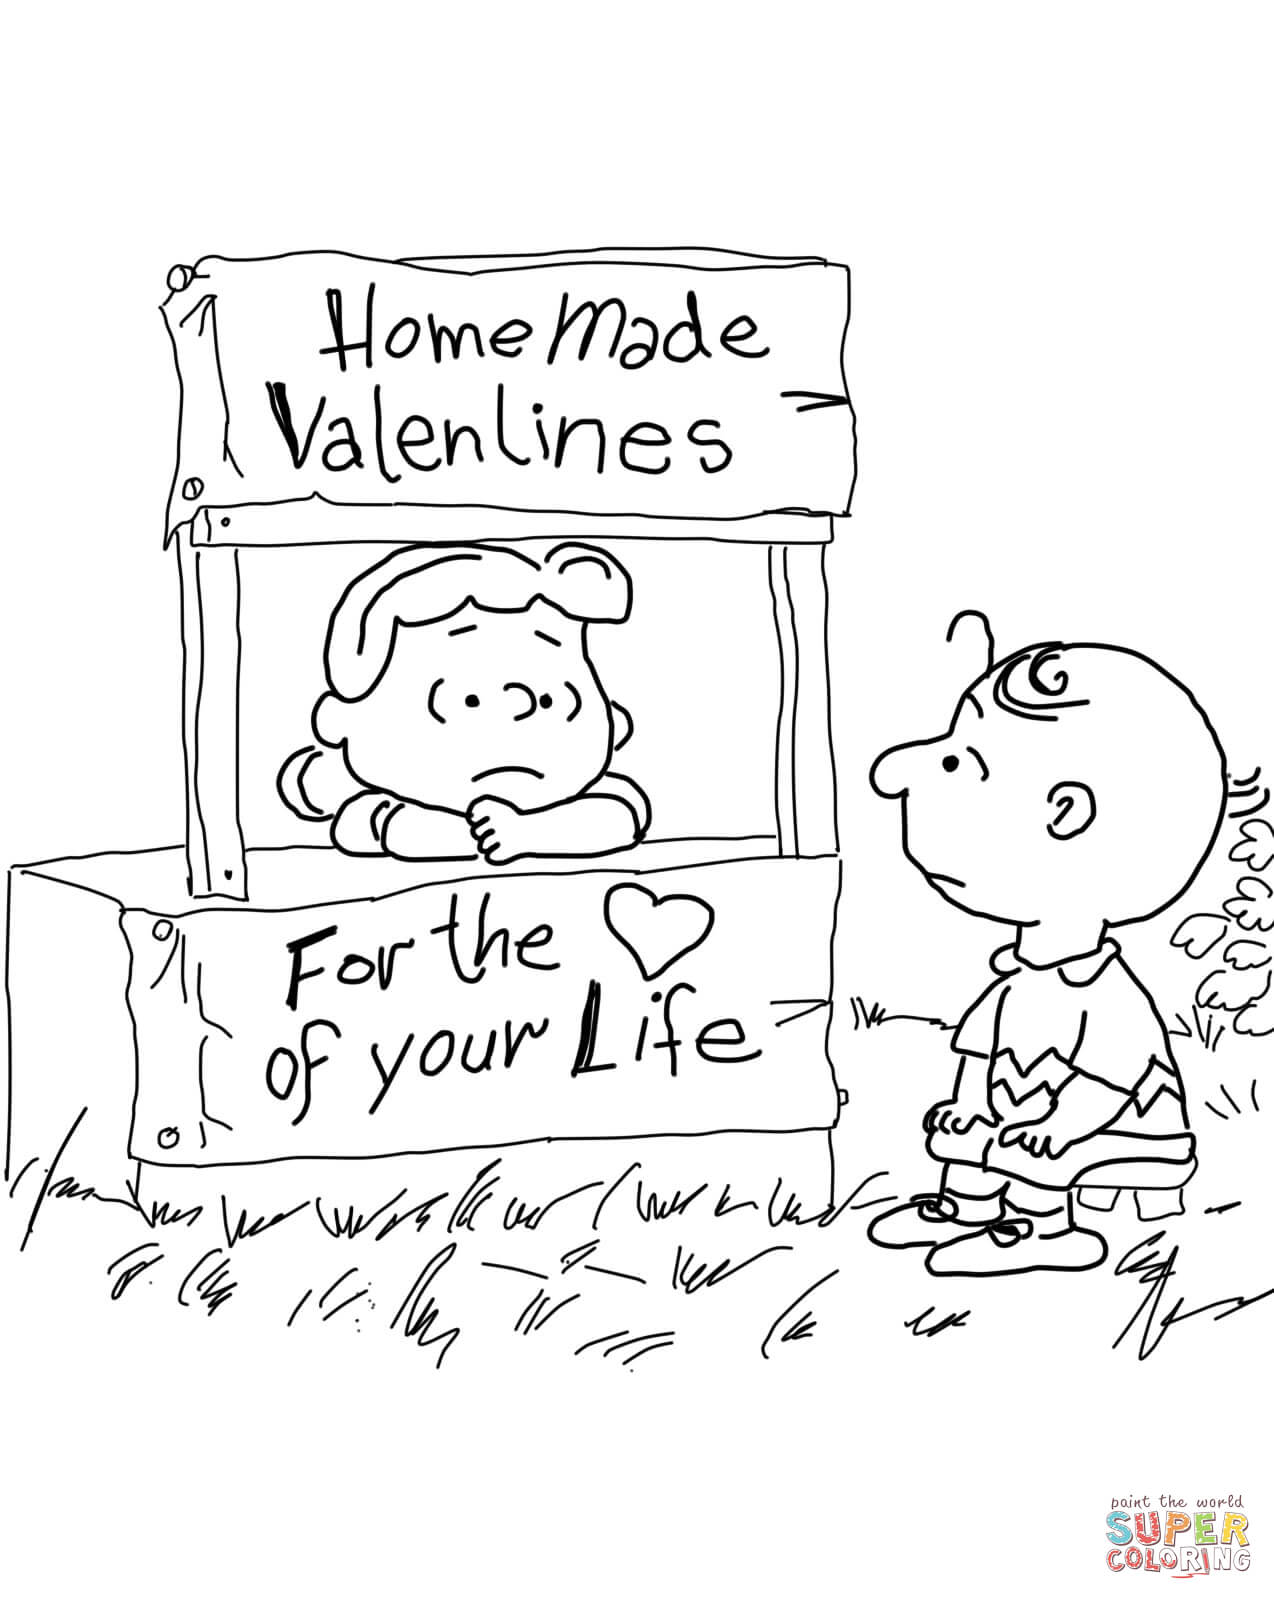 Peanuts Valentine's Day coloring page | Free Printable Coloring Pages